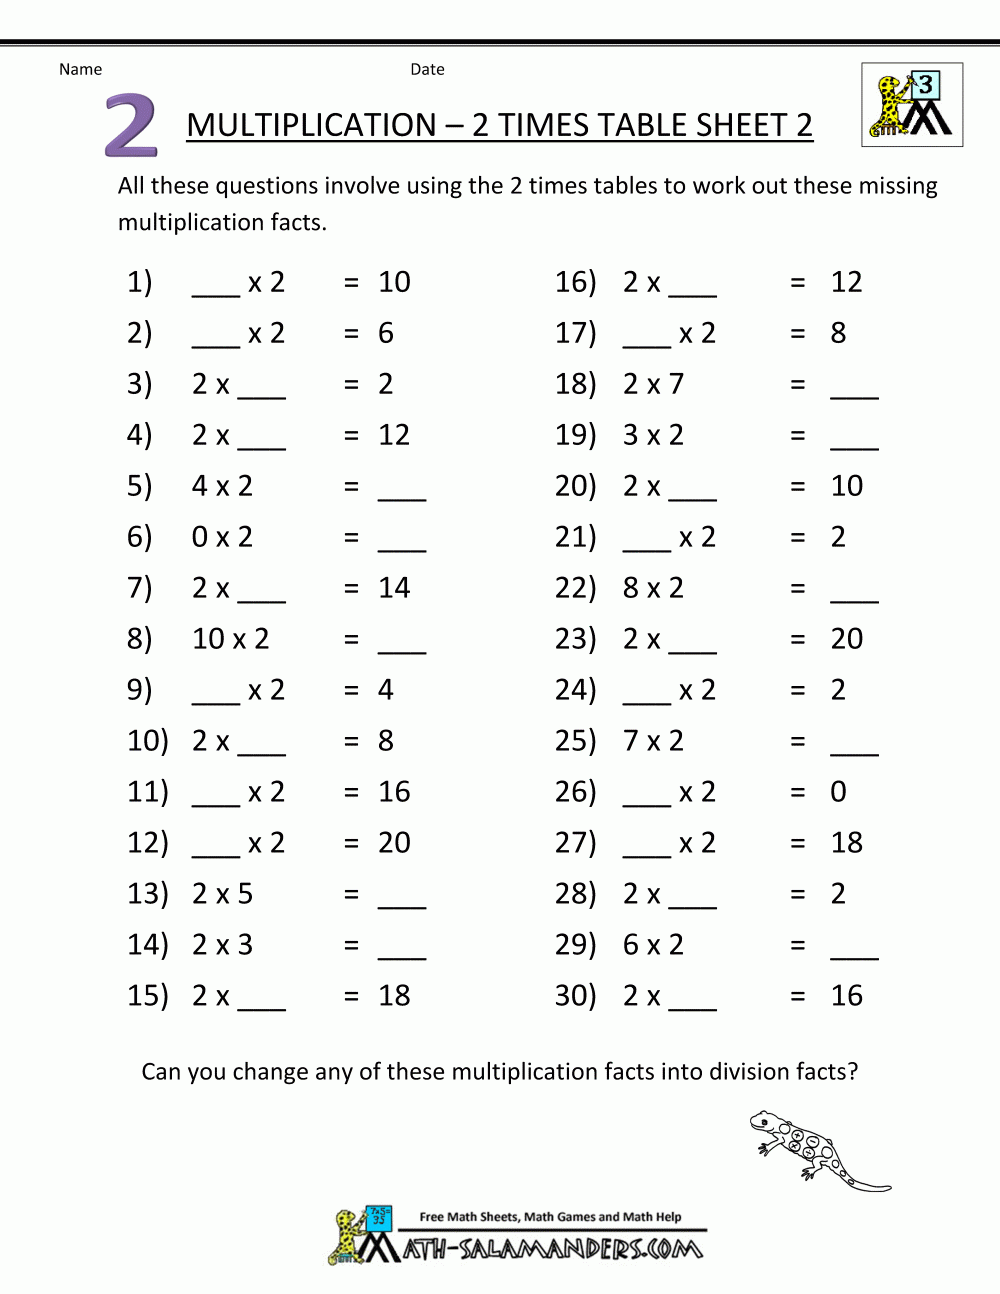 Multiplication Table With Answers Printable | Printable Multiplication